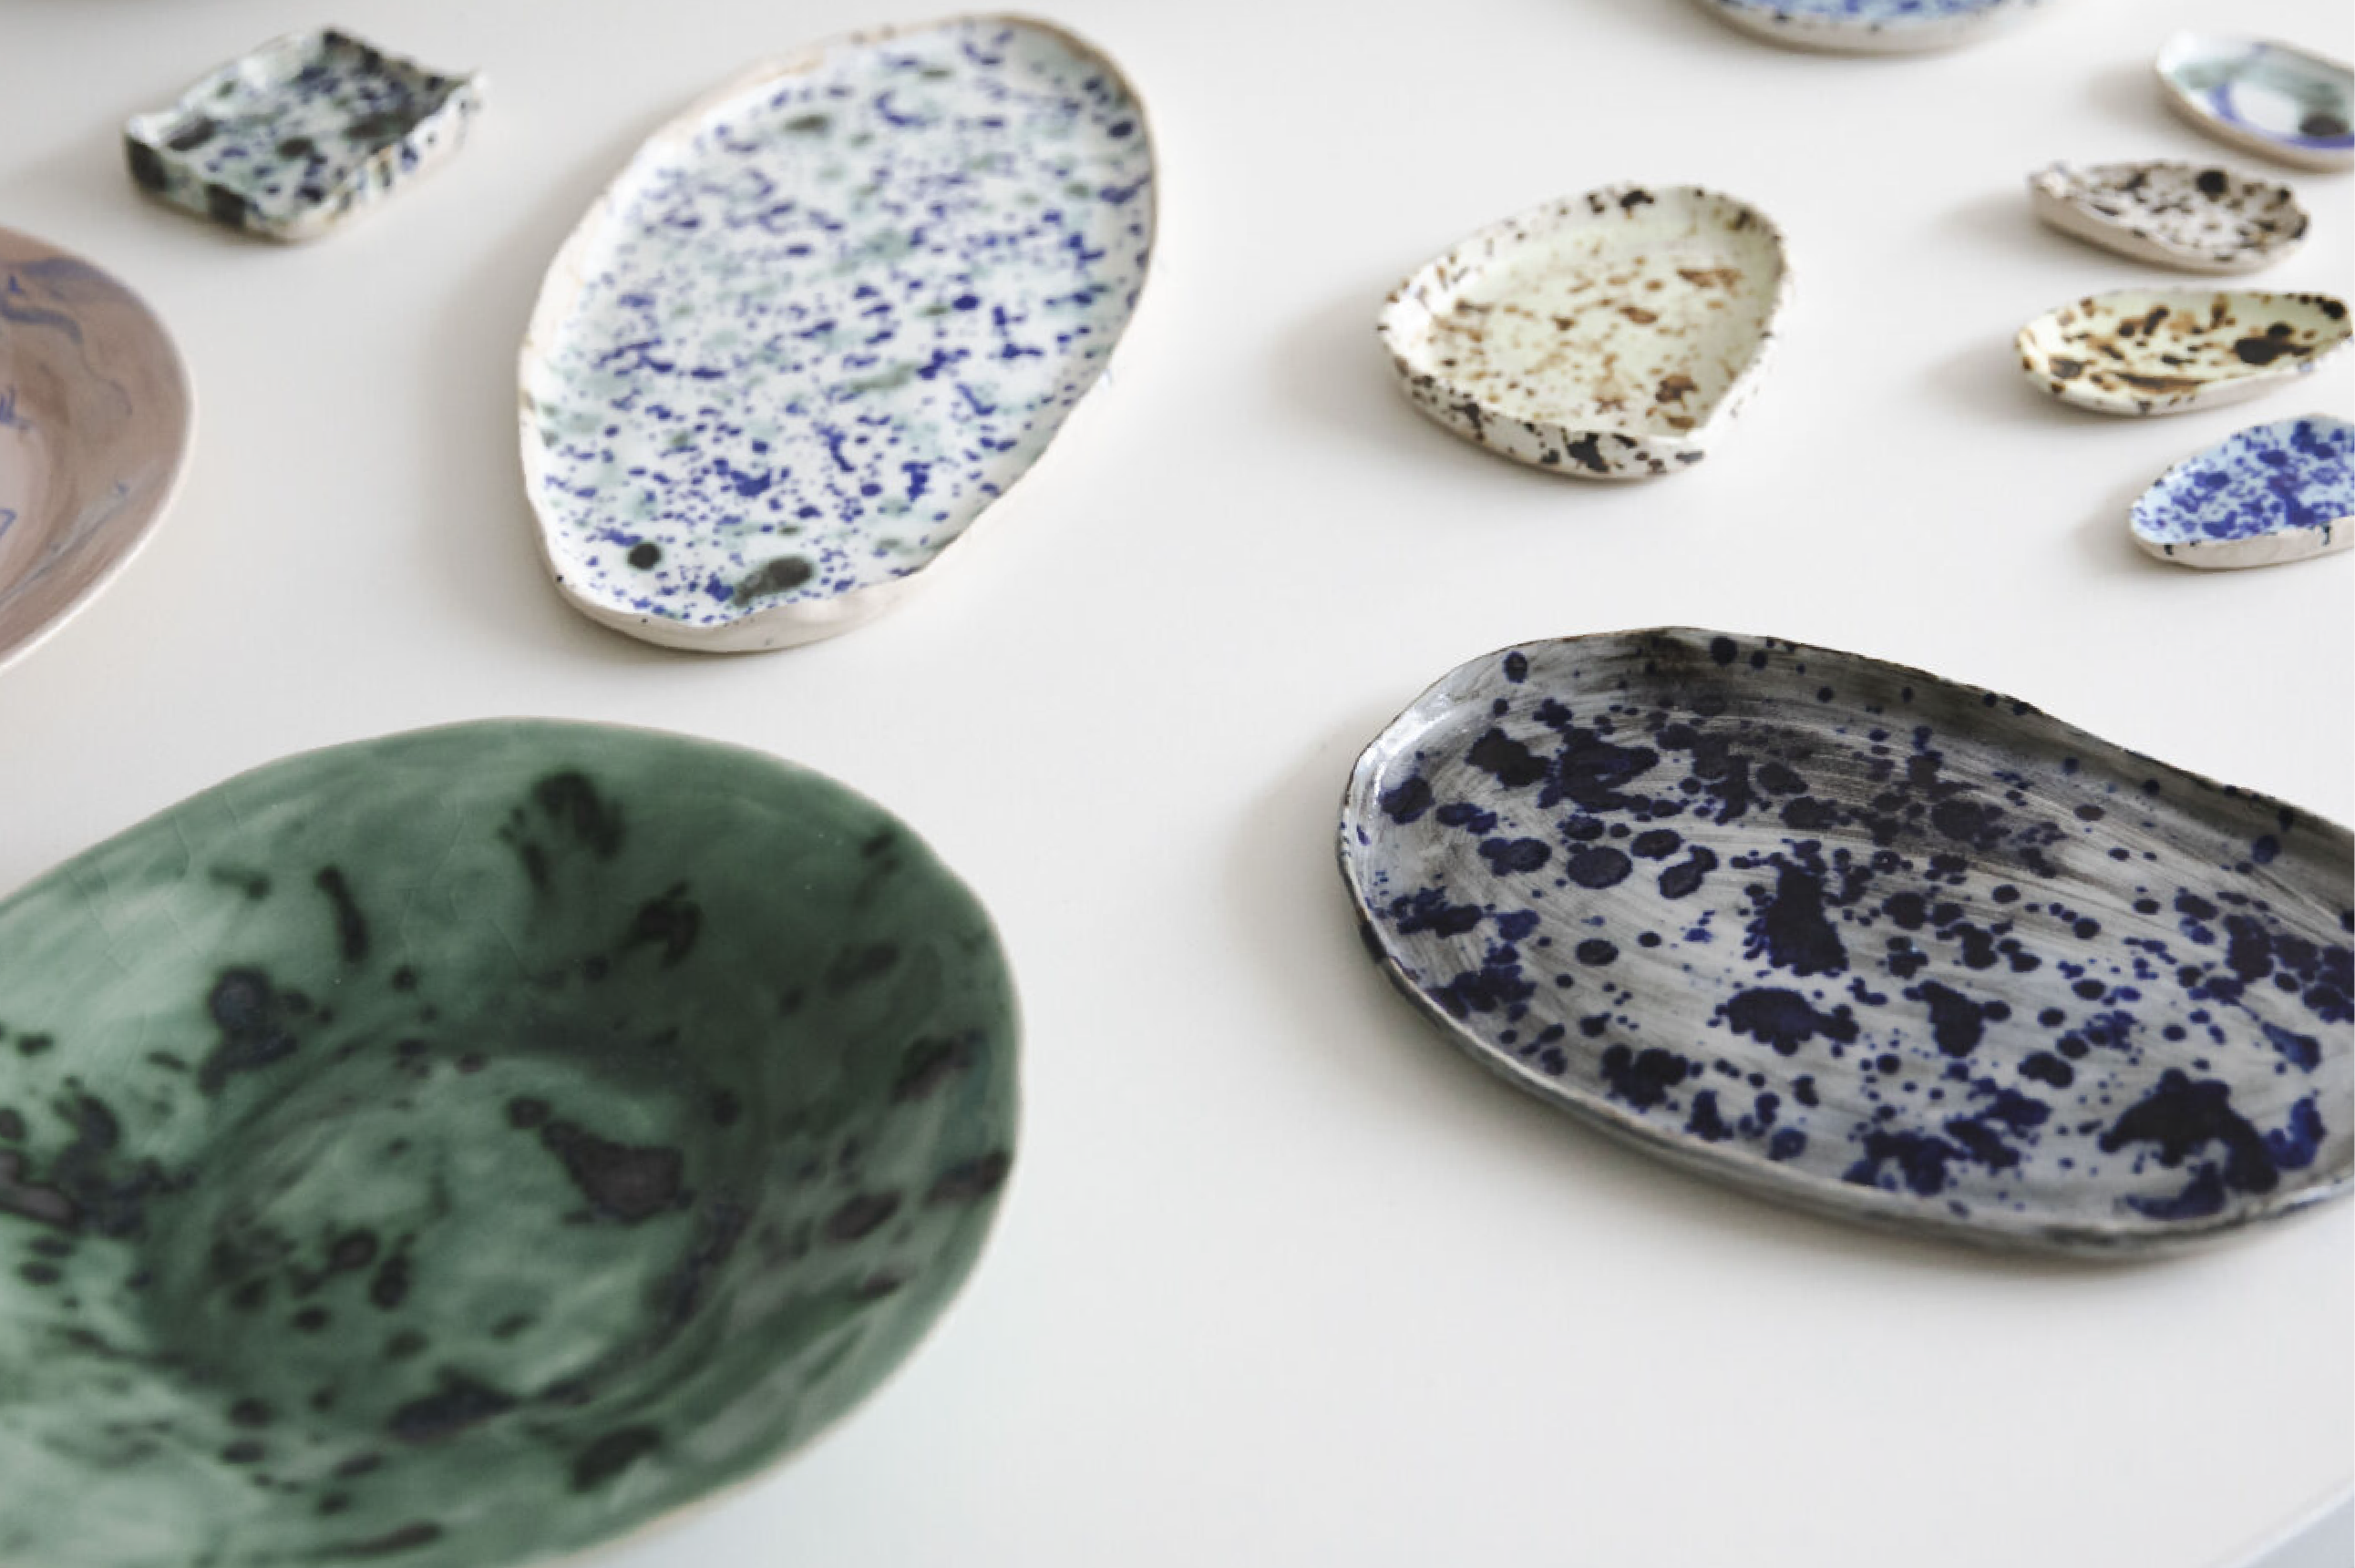 Handcrafted ceramics made by Siân Dolding